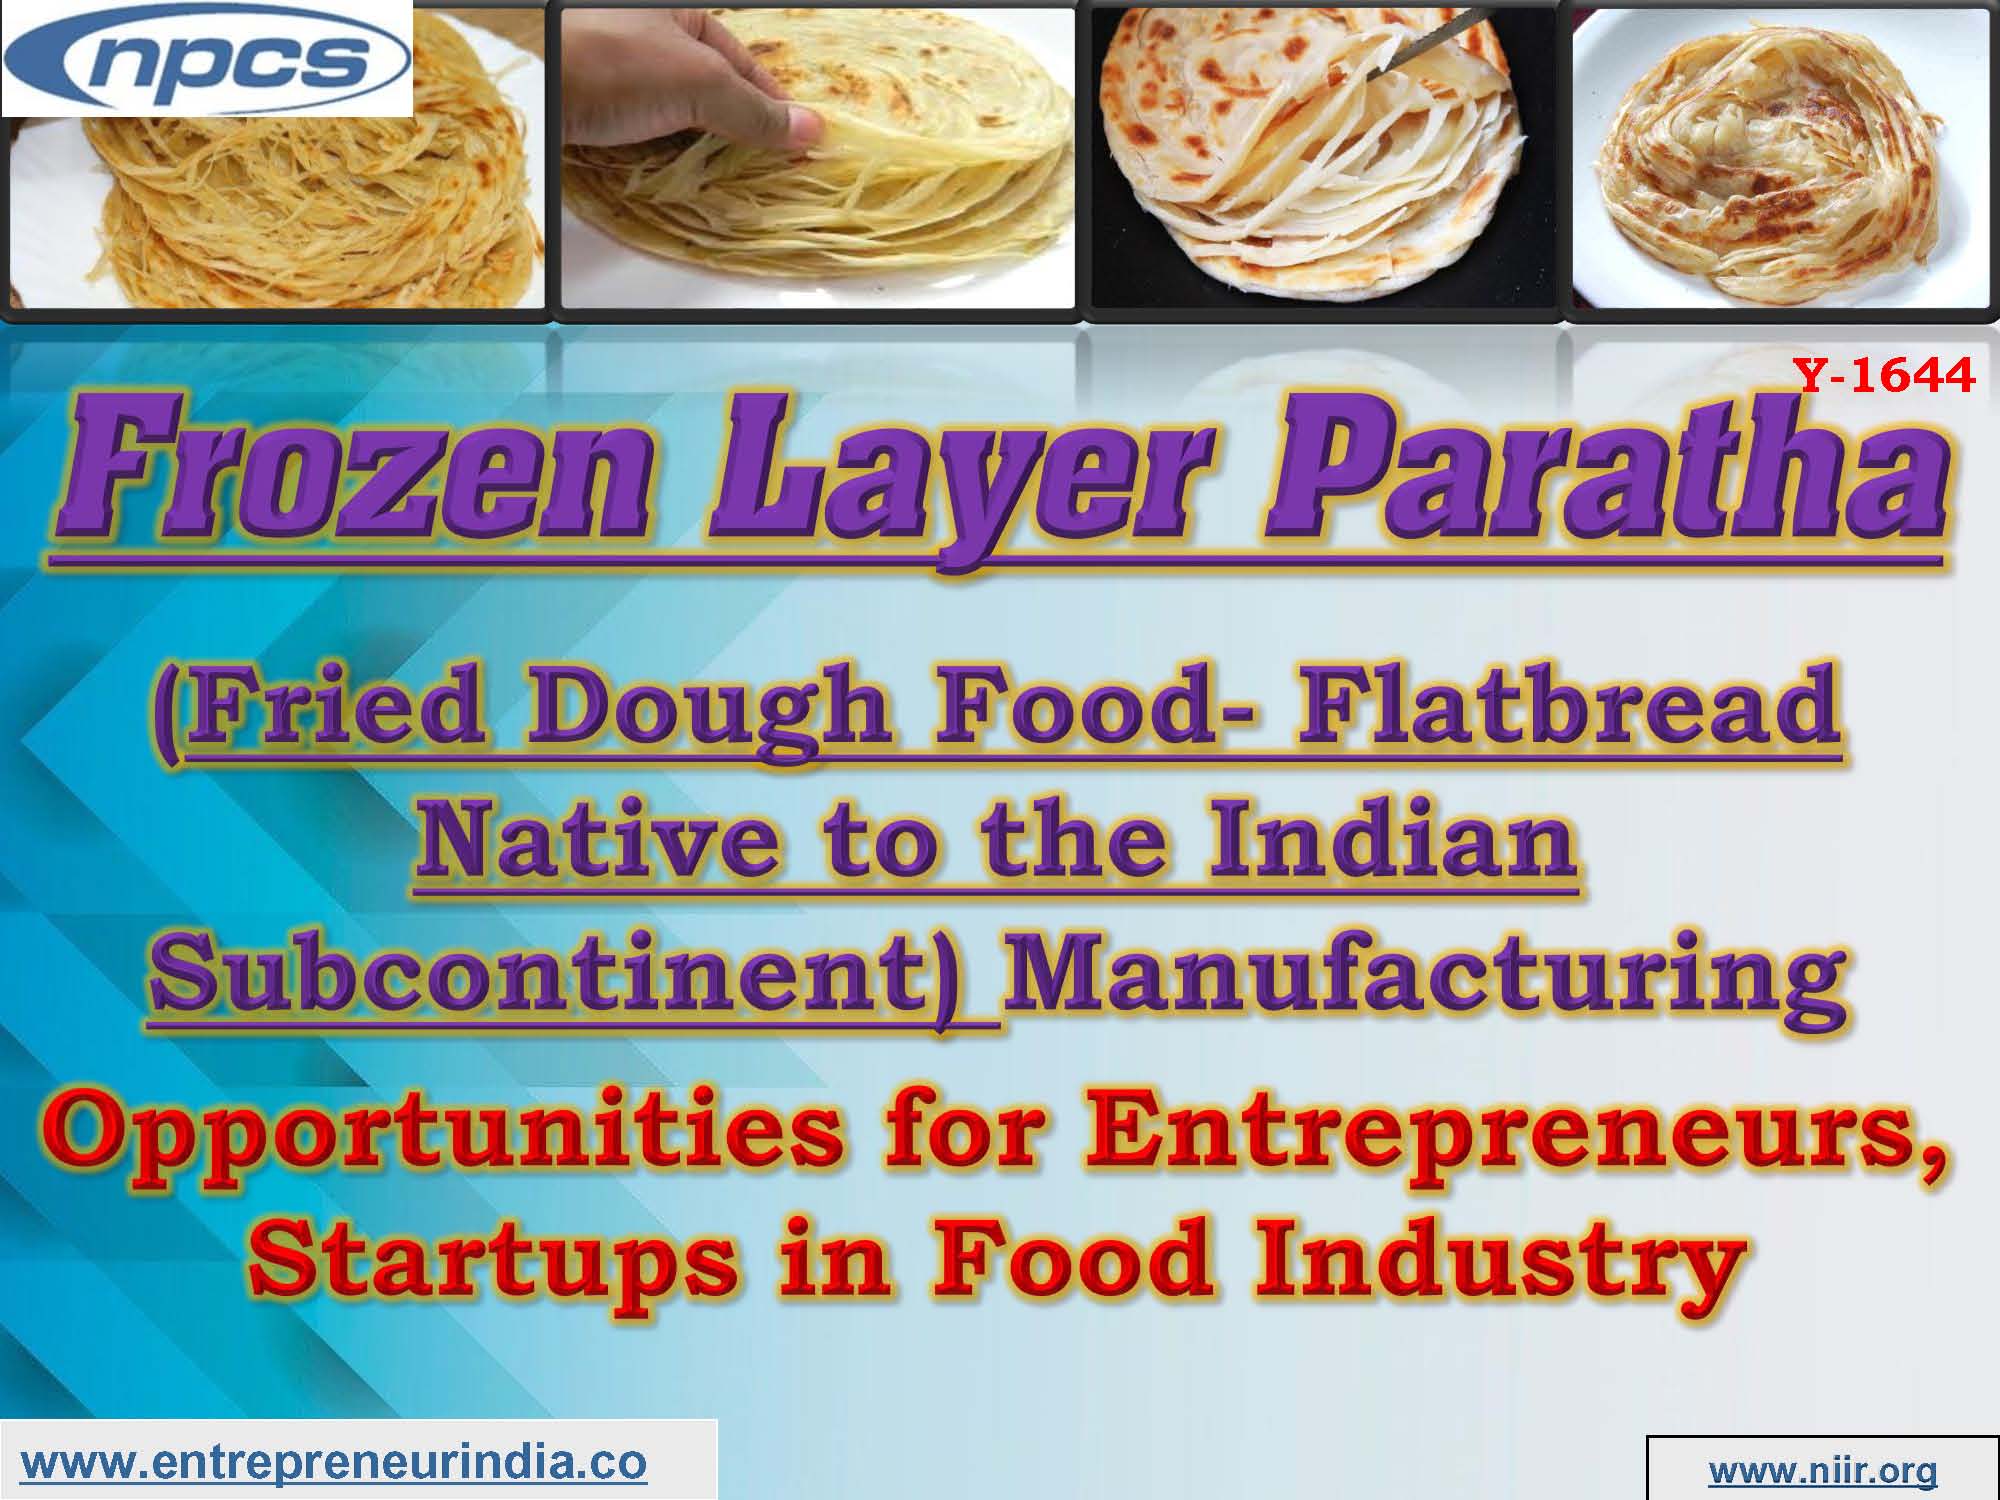 Frozen Layer Paratha (Fried Dough Food- Flatbread Native to the Indian Subcontinent)